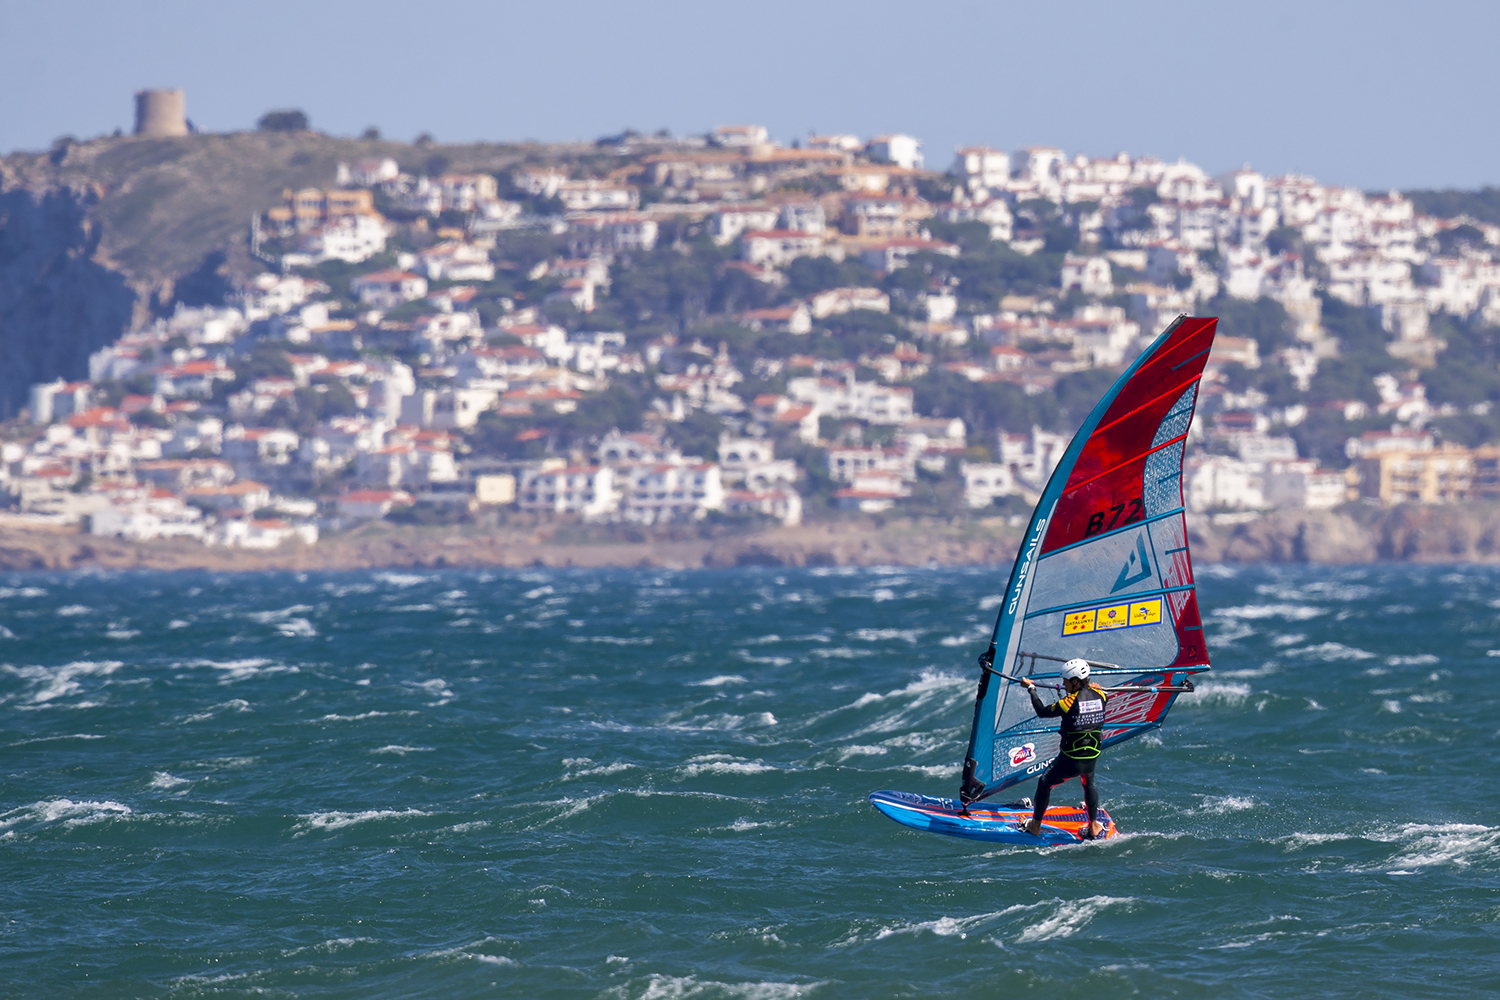 Click to Enlarge - Wild foiling conditions in Costa Brava